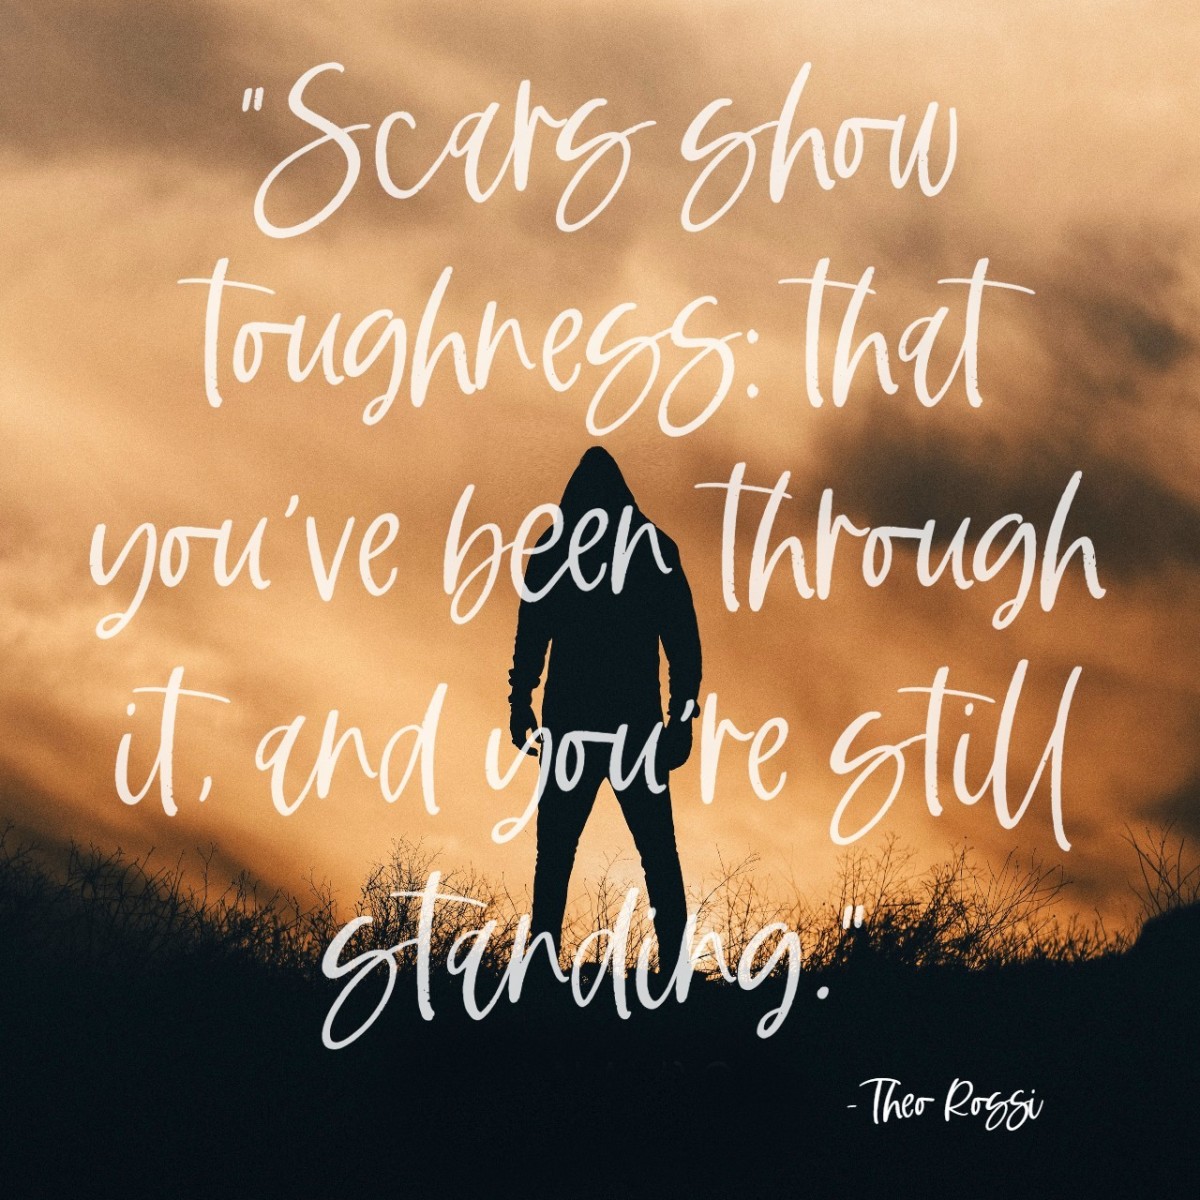 Scars show toughness: that you've been through it, and you're still standing.